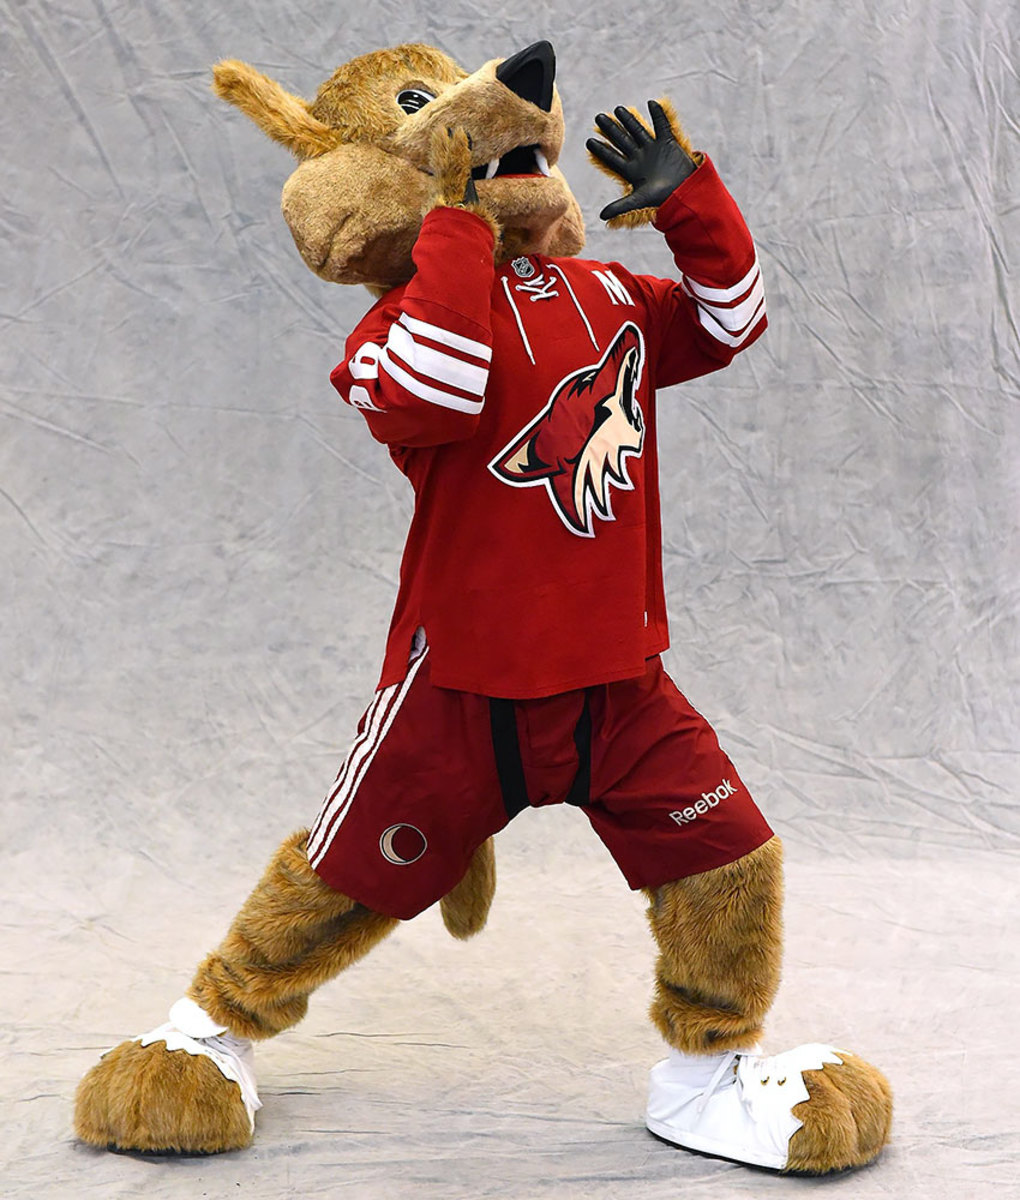 Lions, Tigers, and Bears; Oh My! Ranking Each NHL Team's Mascots